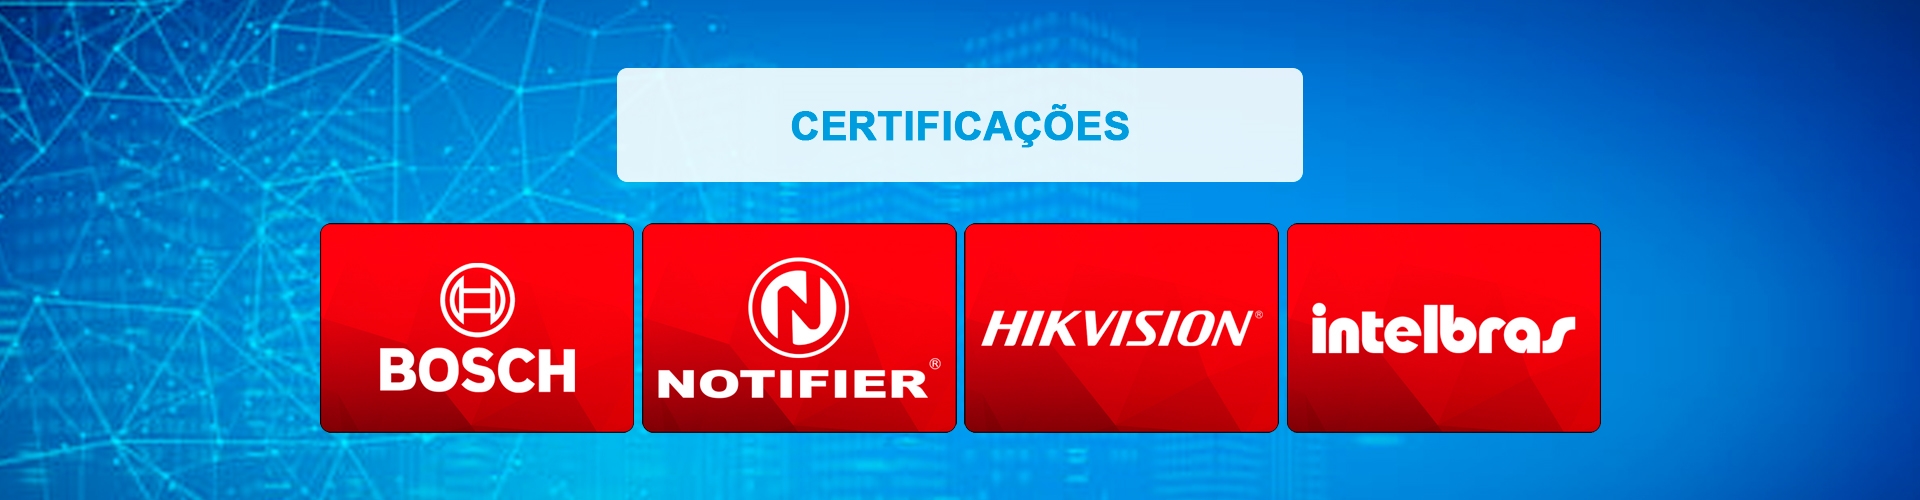 certificacao-home